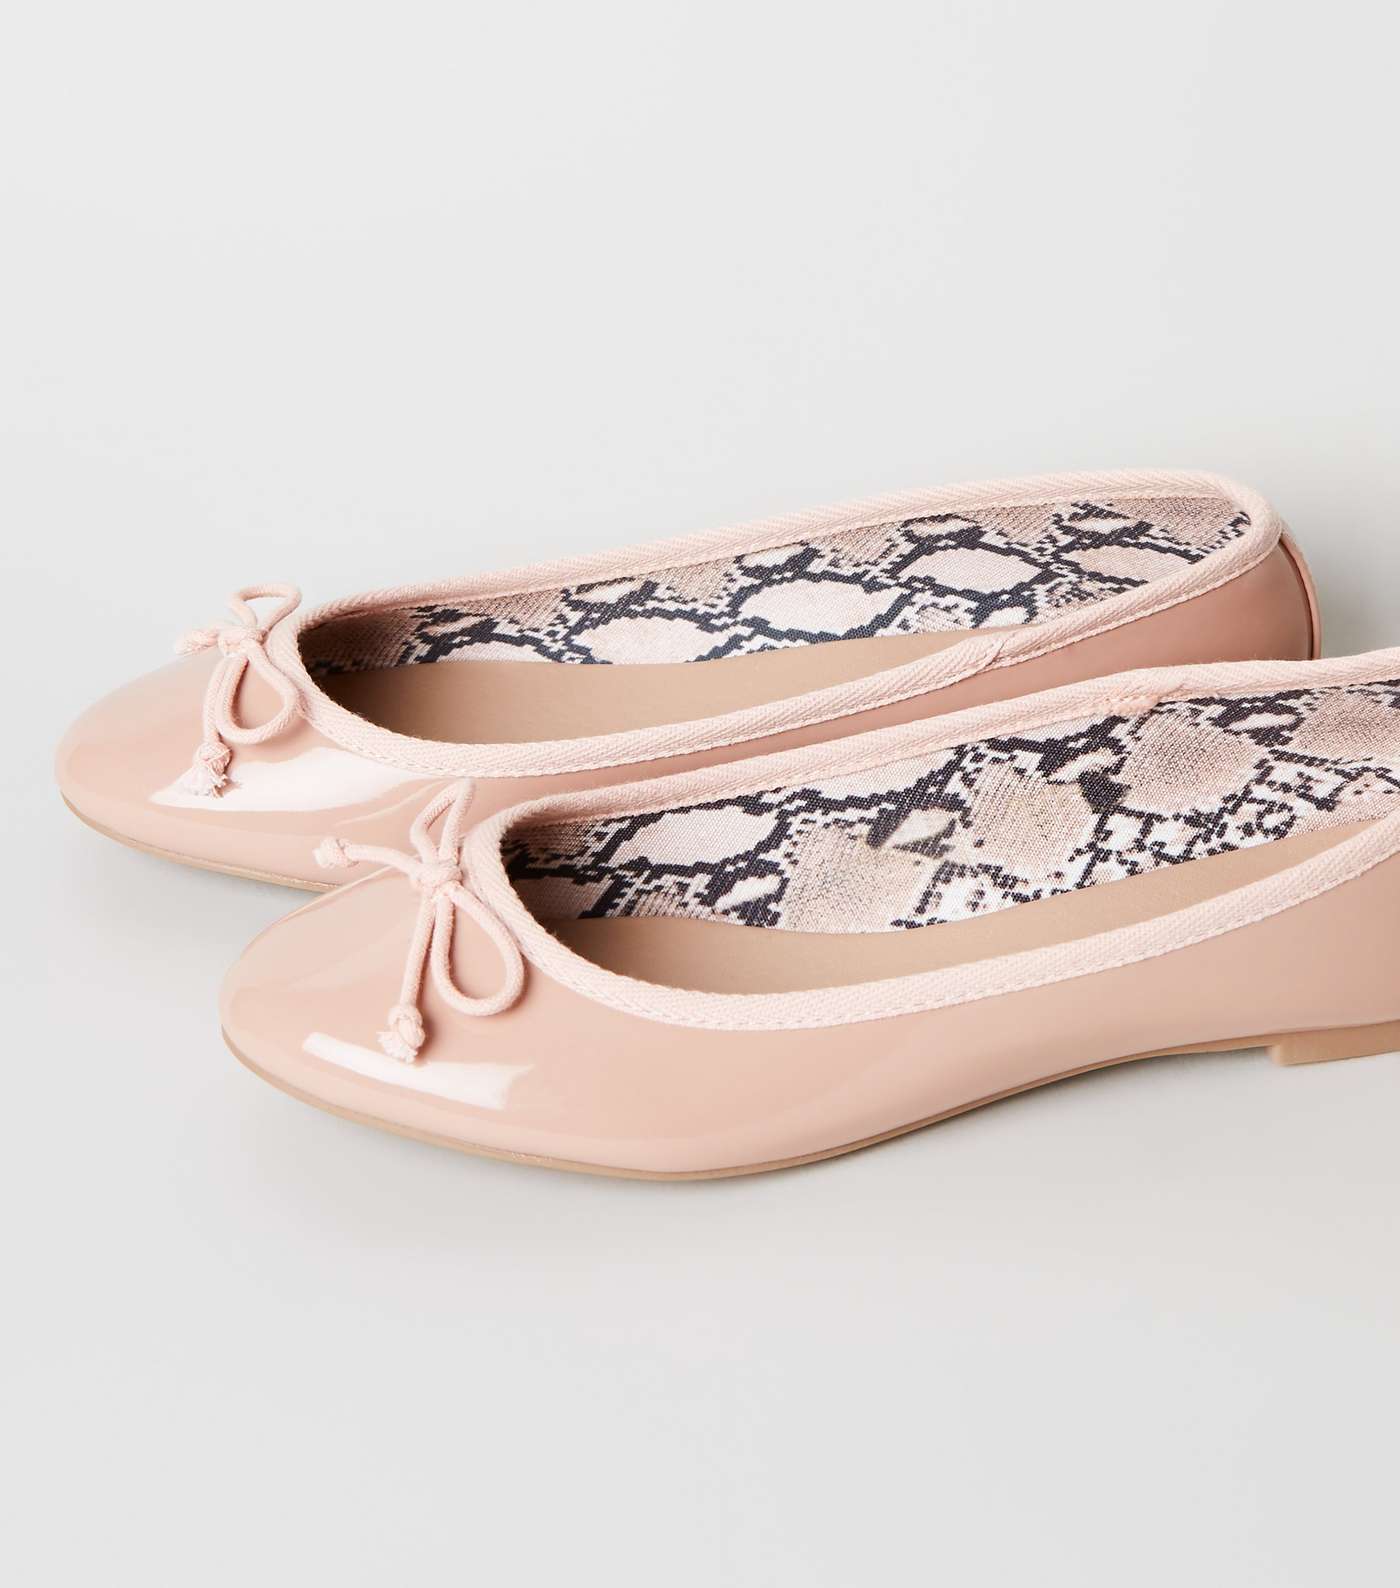 Nude Patent Snake Print Lined Ballet Pumps Image 4